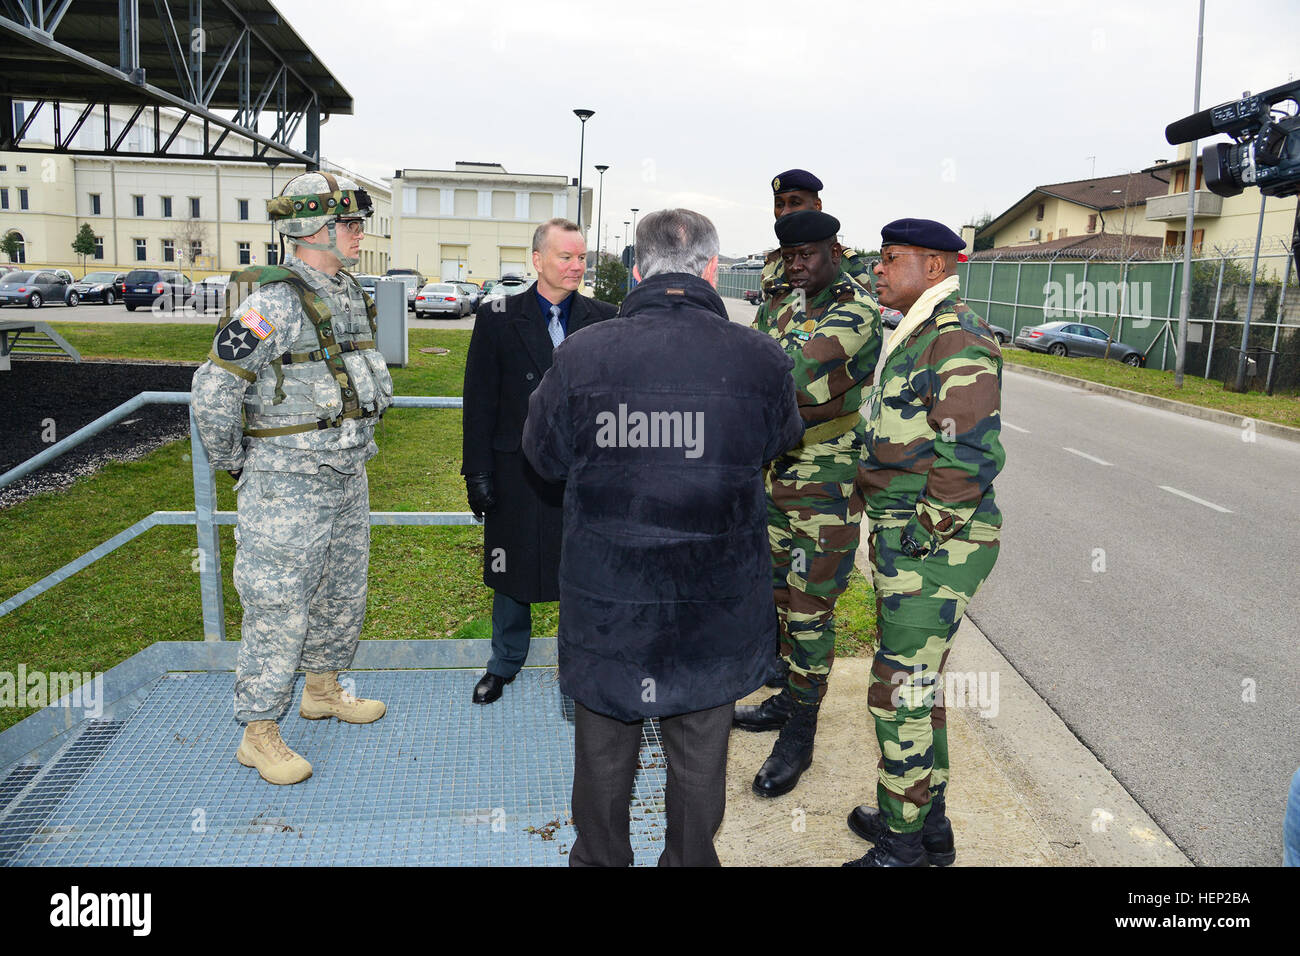 Ivano Trevisanutto, chief, Training Support Center Italy; James V. Matheson, chief, Regional Training Support Division South, brief the Deployable Instrumentation System (DISE) in English and French, during the visit of Brig. Gen. Cheikh Gueye, Senegalese chief of army staff. DISE is a system that uses lasers, GPS and computers to detect and track hits from weapons for realistic combat training. The seminar was intended as a forum for attendees to share their experiences in supporting coalition and combatant commanders in a joint task force environment. (Photos by U.S. Army Visual Information  Stock Photo